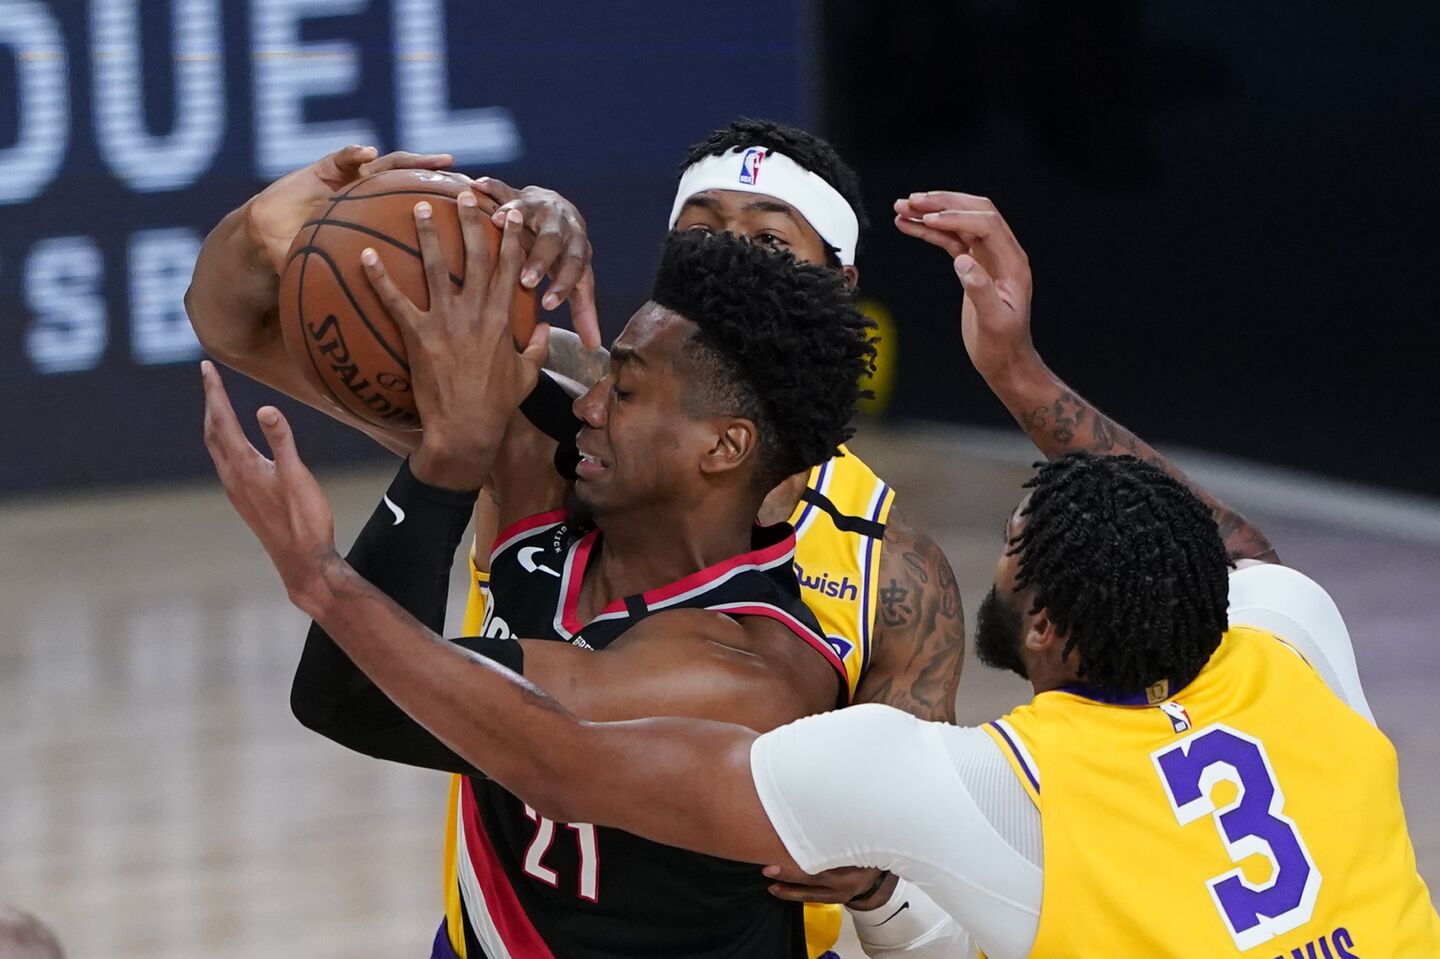 Lakers forward Anthony Davis, right, defends against Portland Trail Blazers center Hassan Whiteside during the first half.